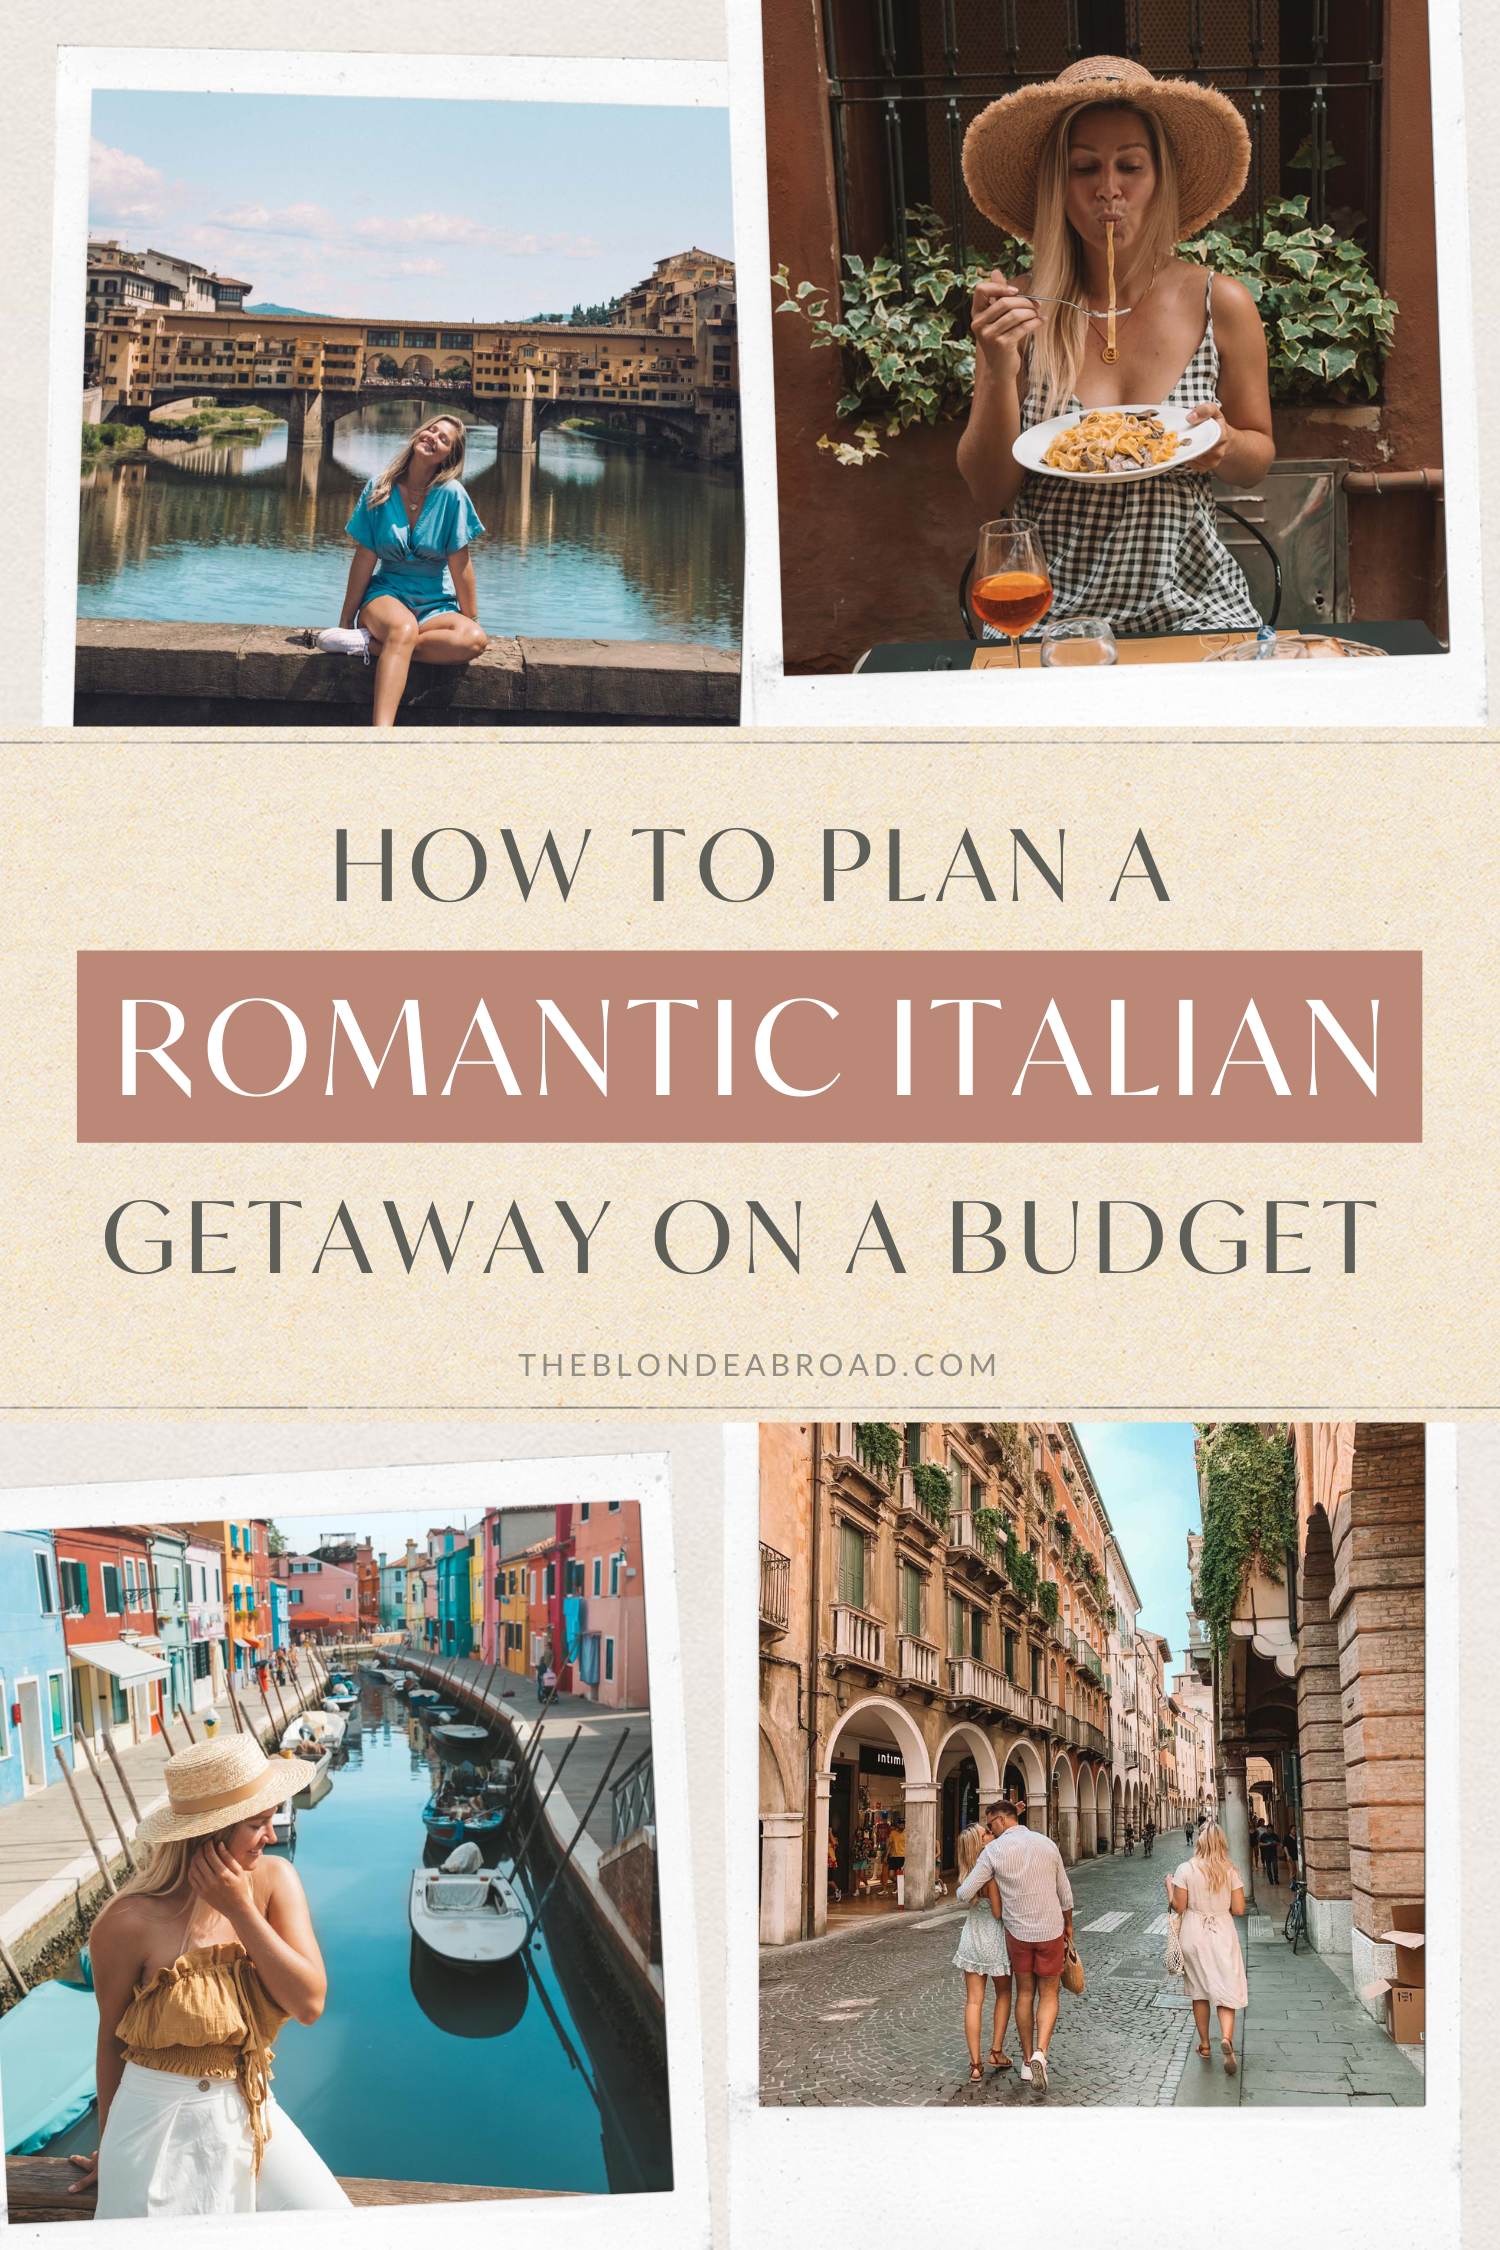 How to Plan a Romantic Italian Getaway on a Budget
